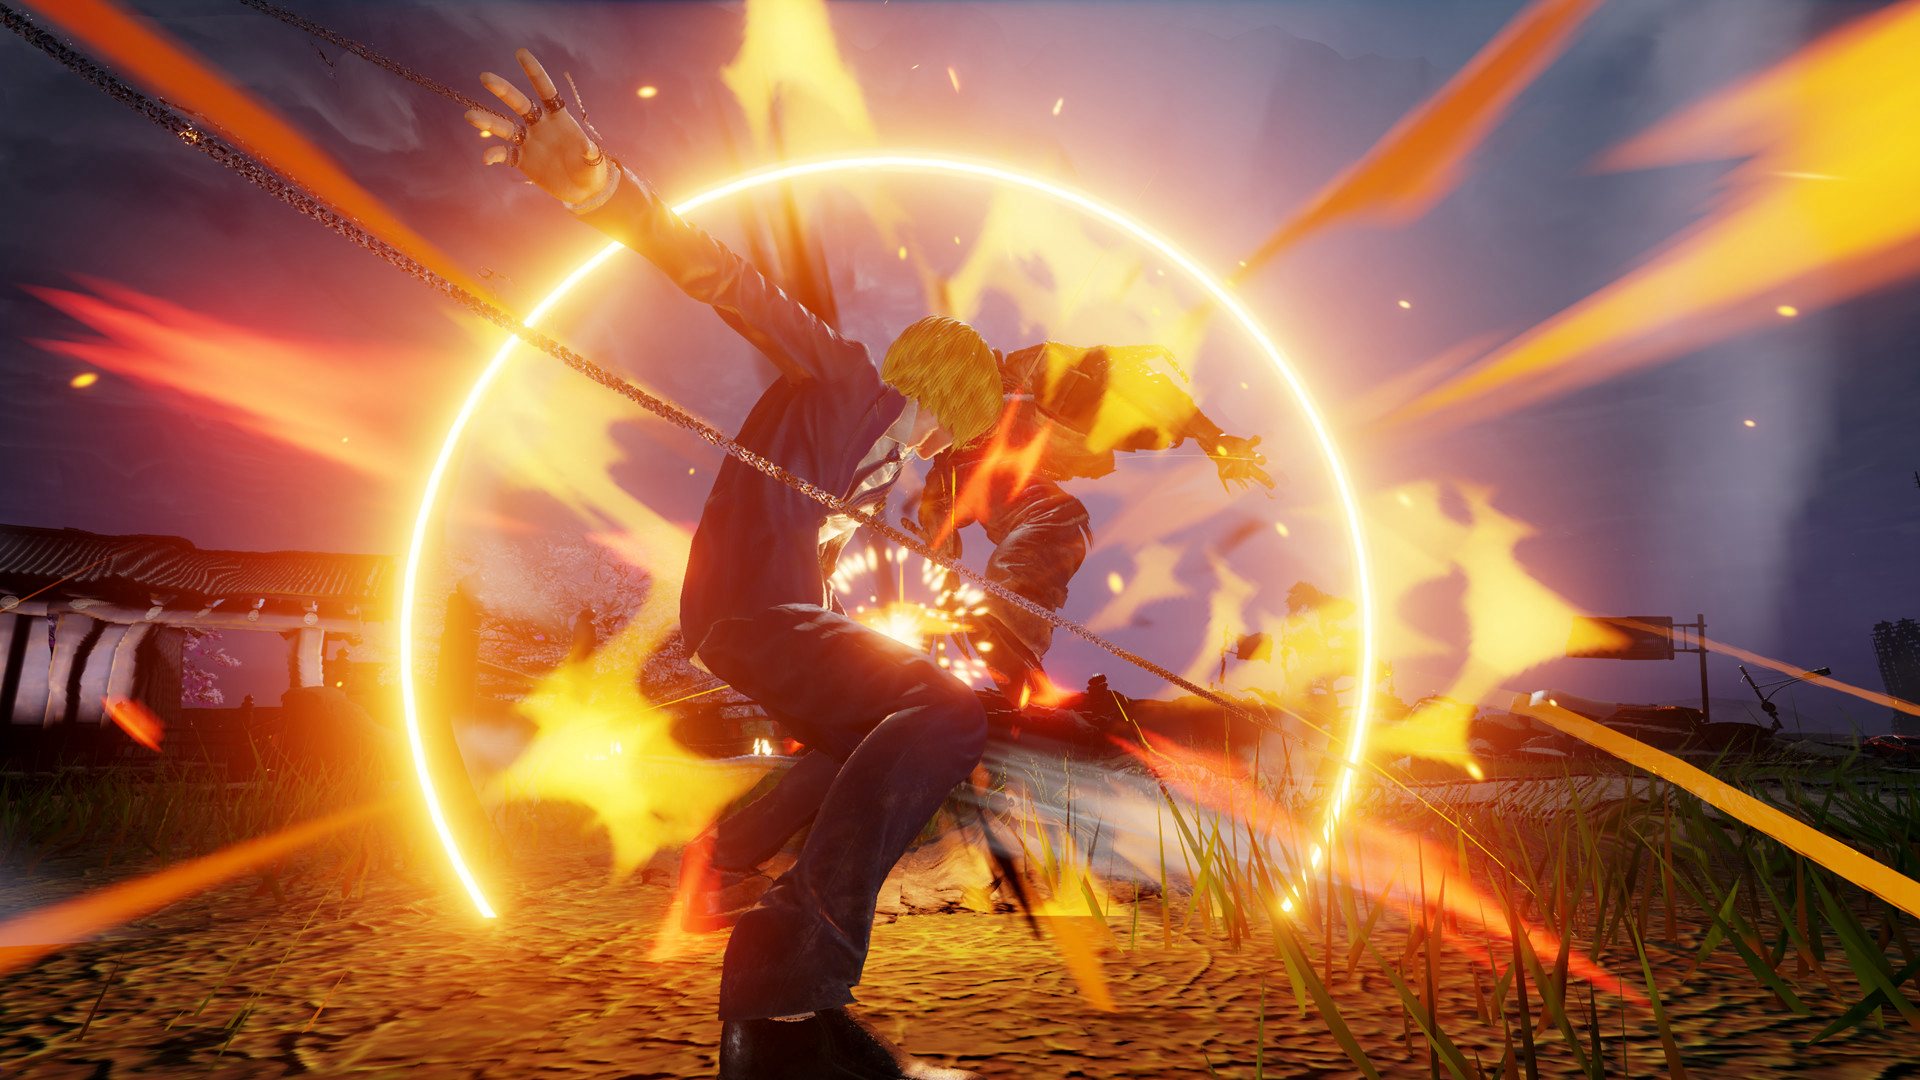 (22.59$) JUMP FORCE PlayStation 4 Account pixelpuffin.net Activation Link